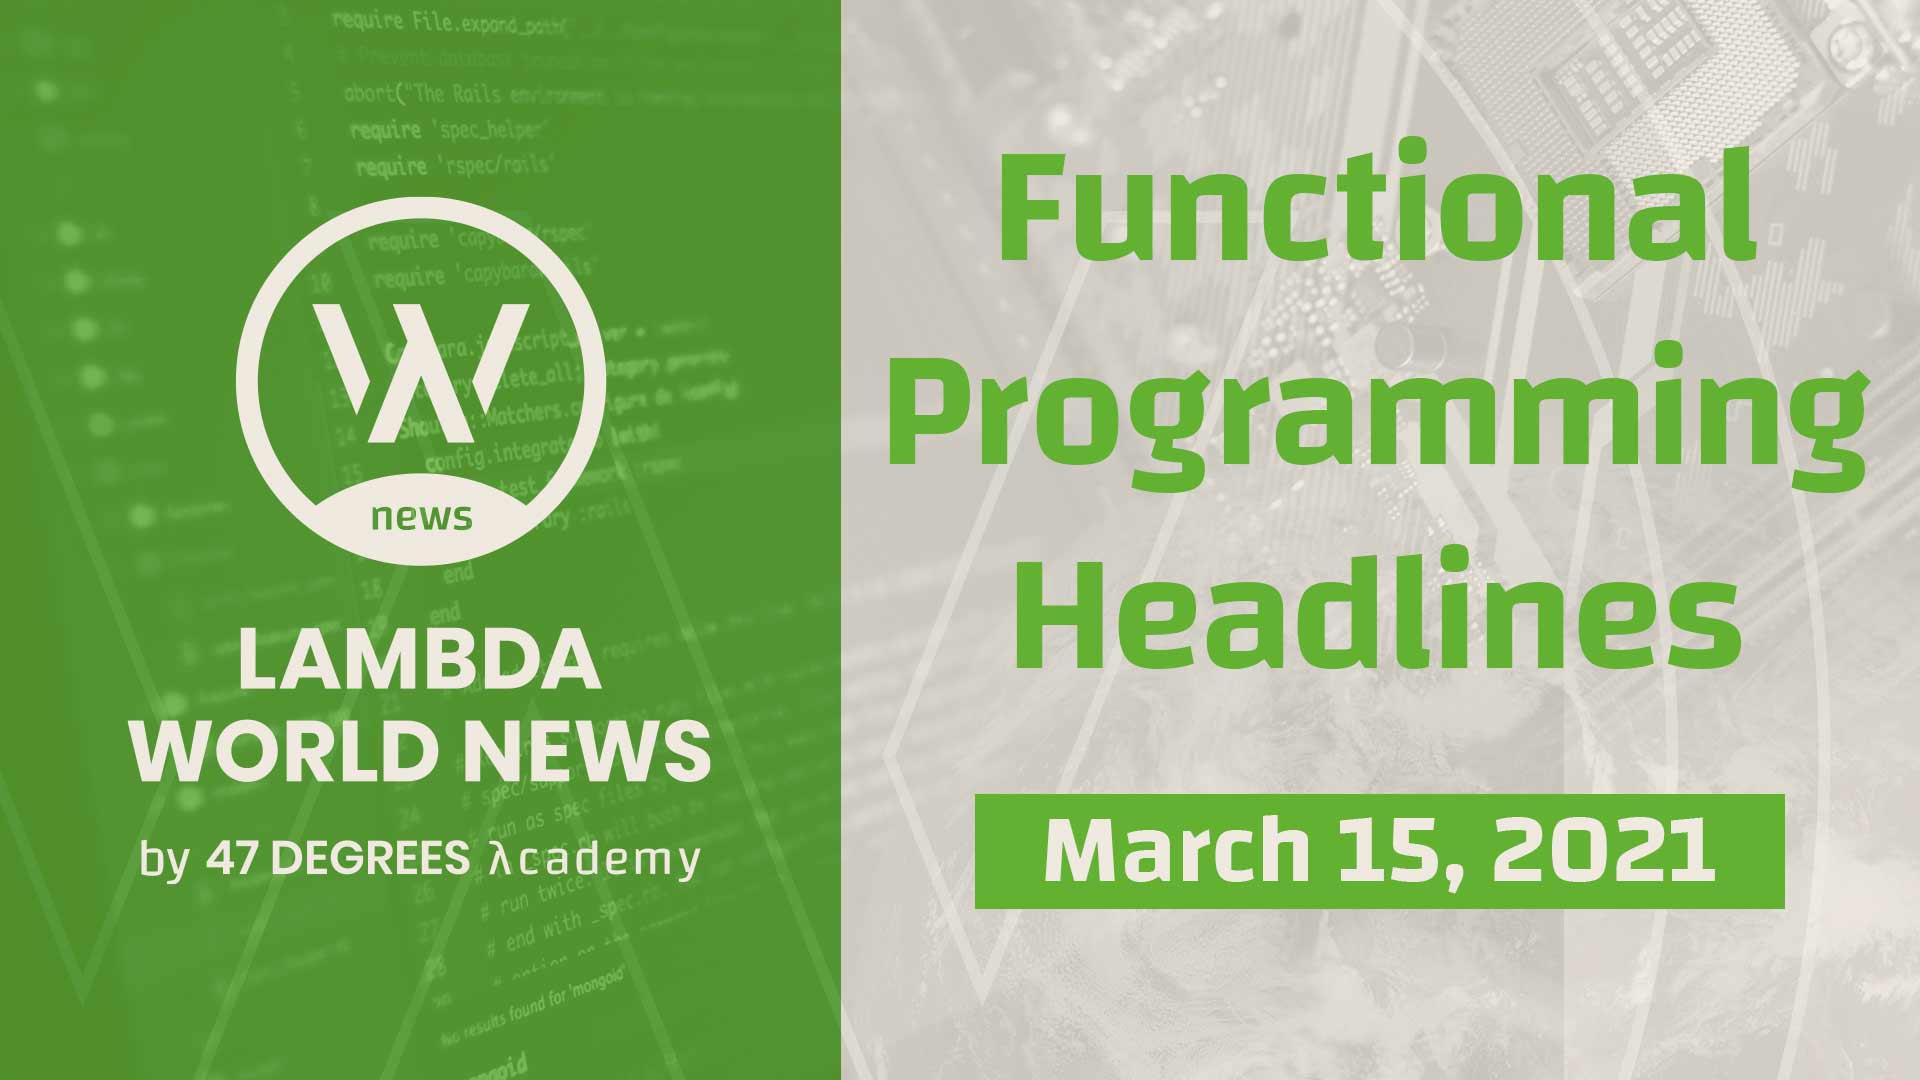 Lambda World News | Functional Programming Headlines for the week of March 15th, 2021